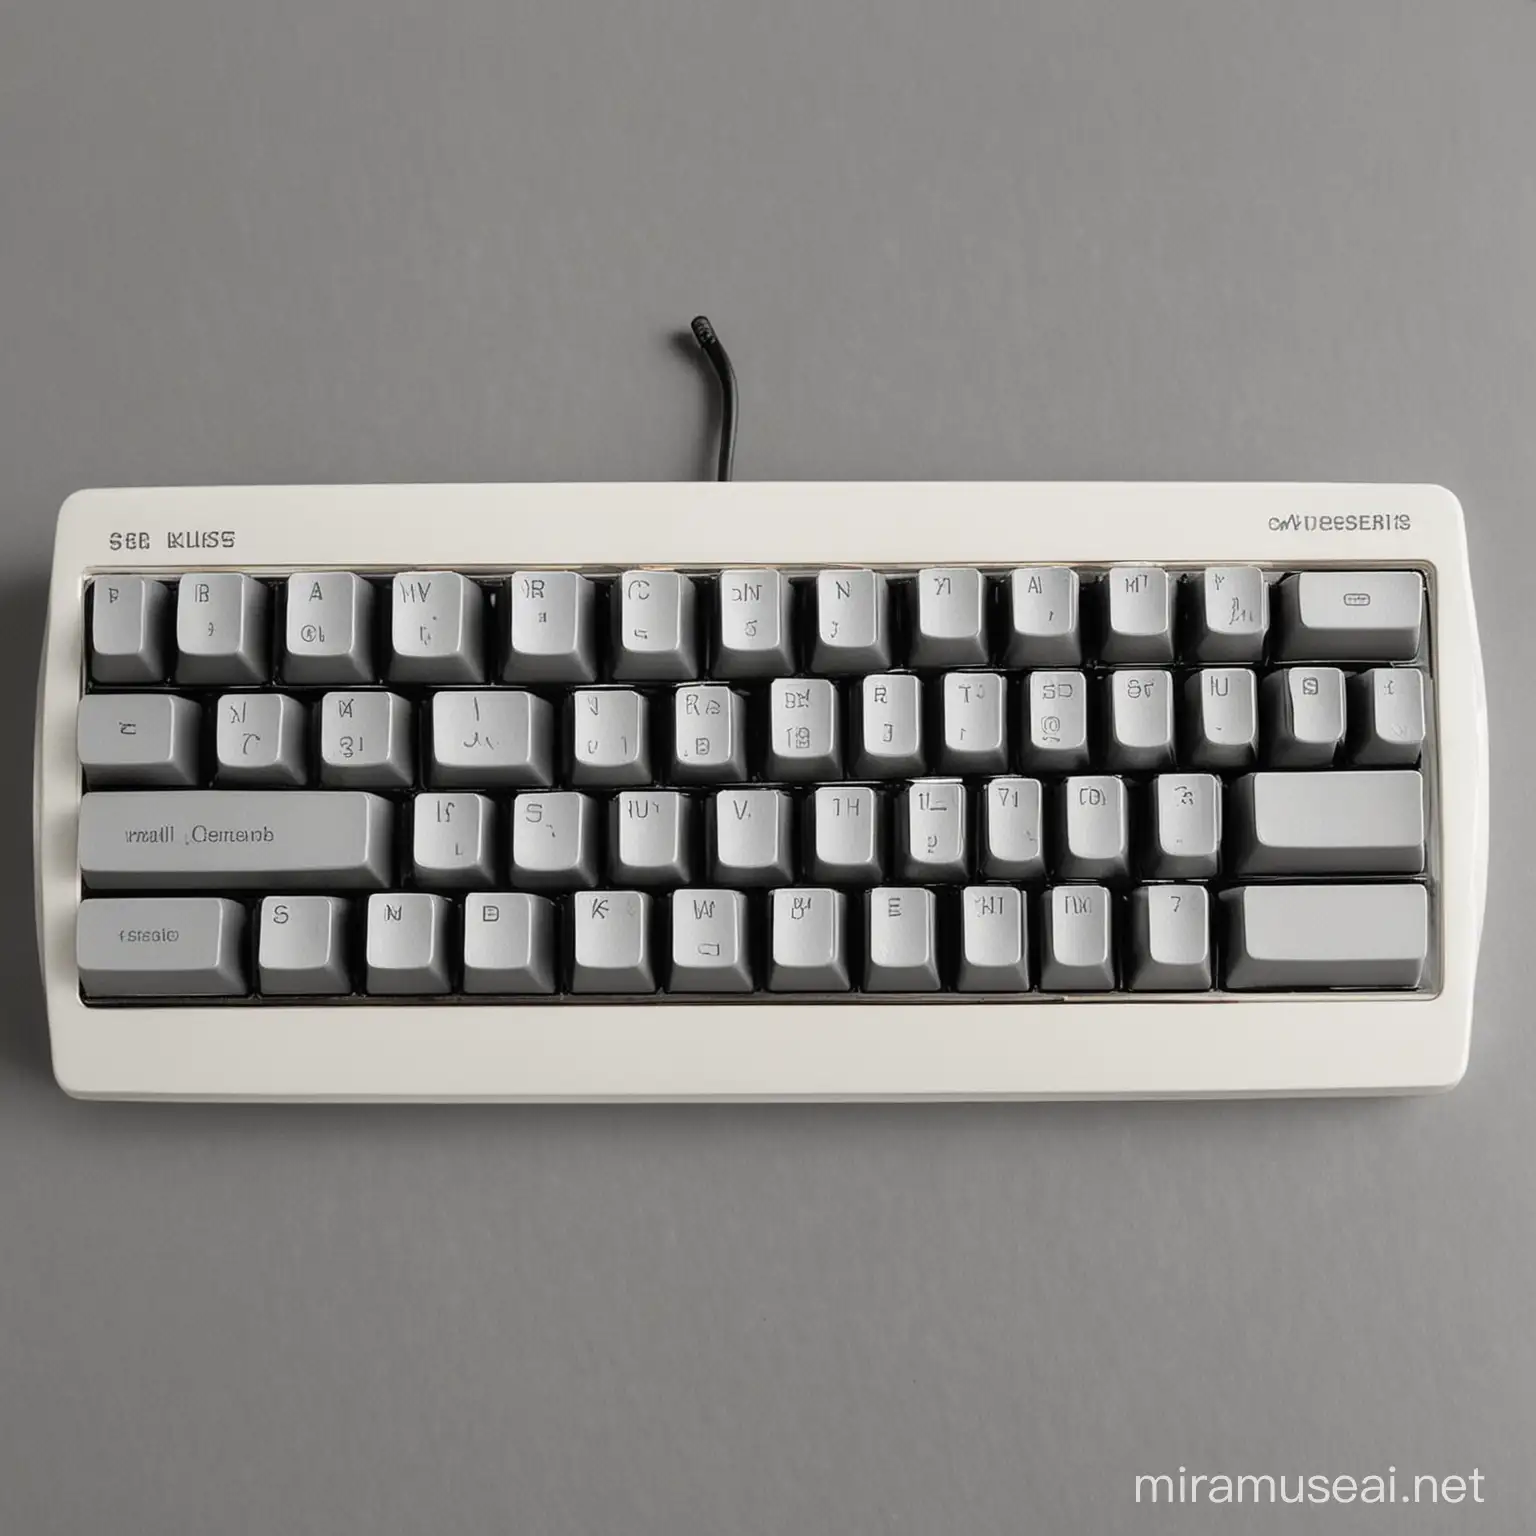 Miniature Keyboard on Wooden Desk with Soft Lighting